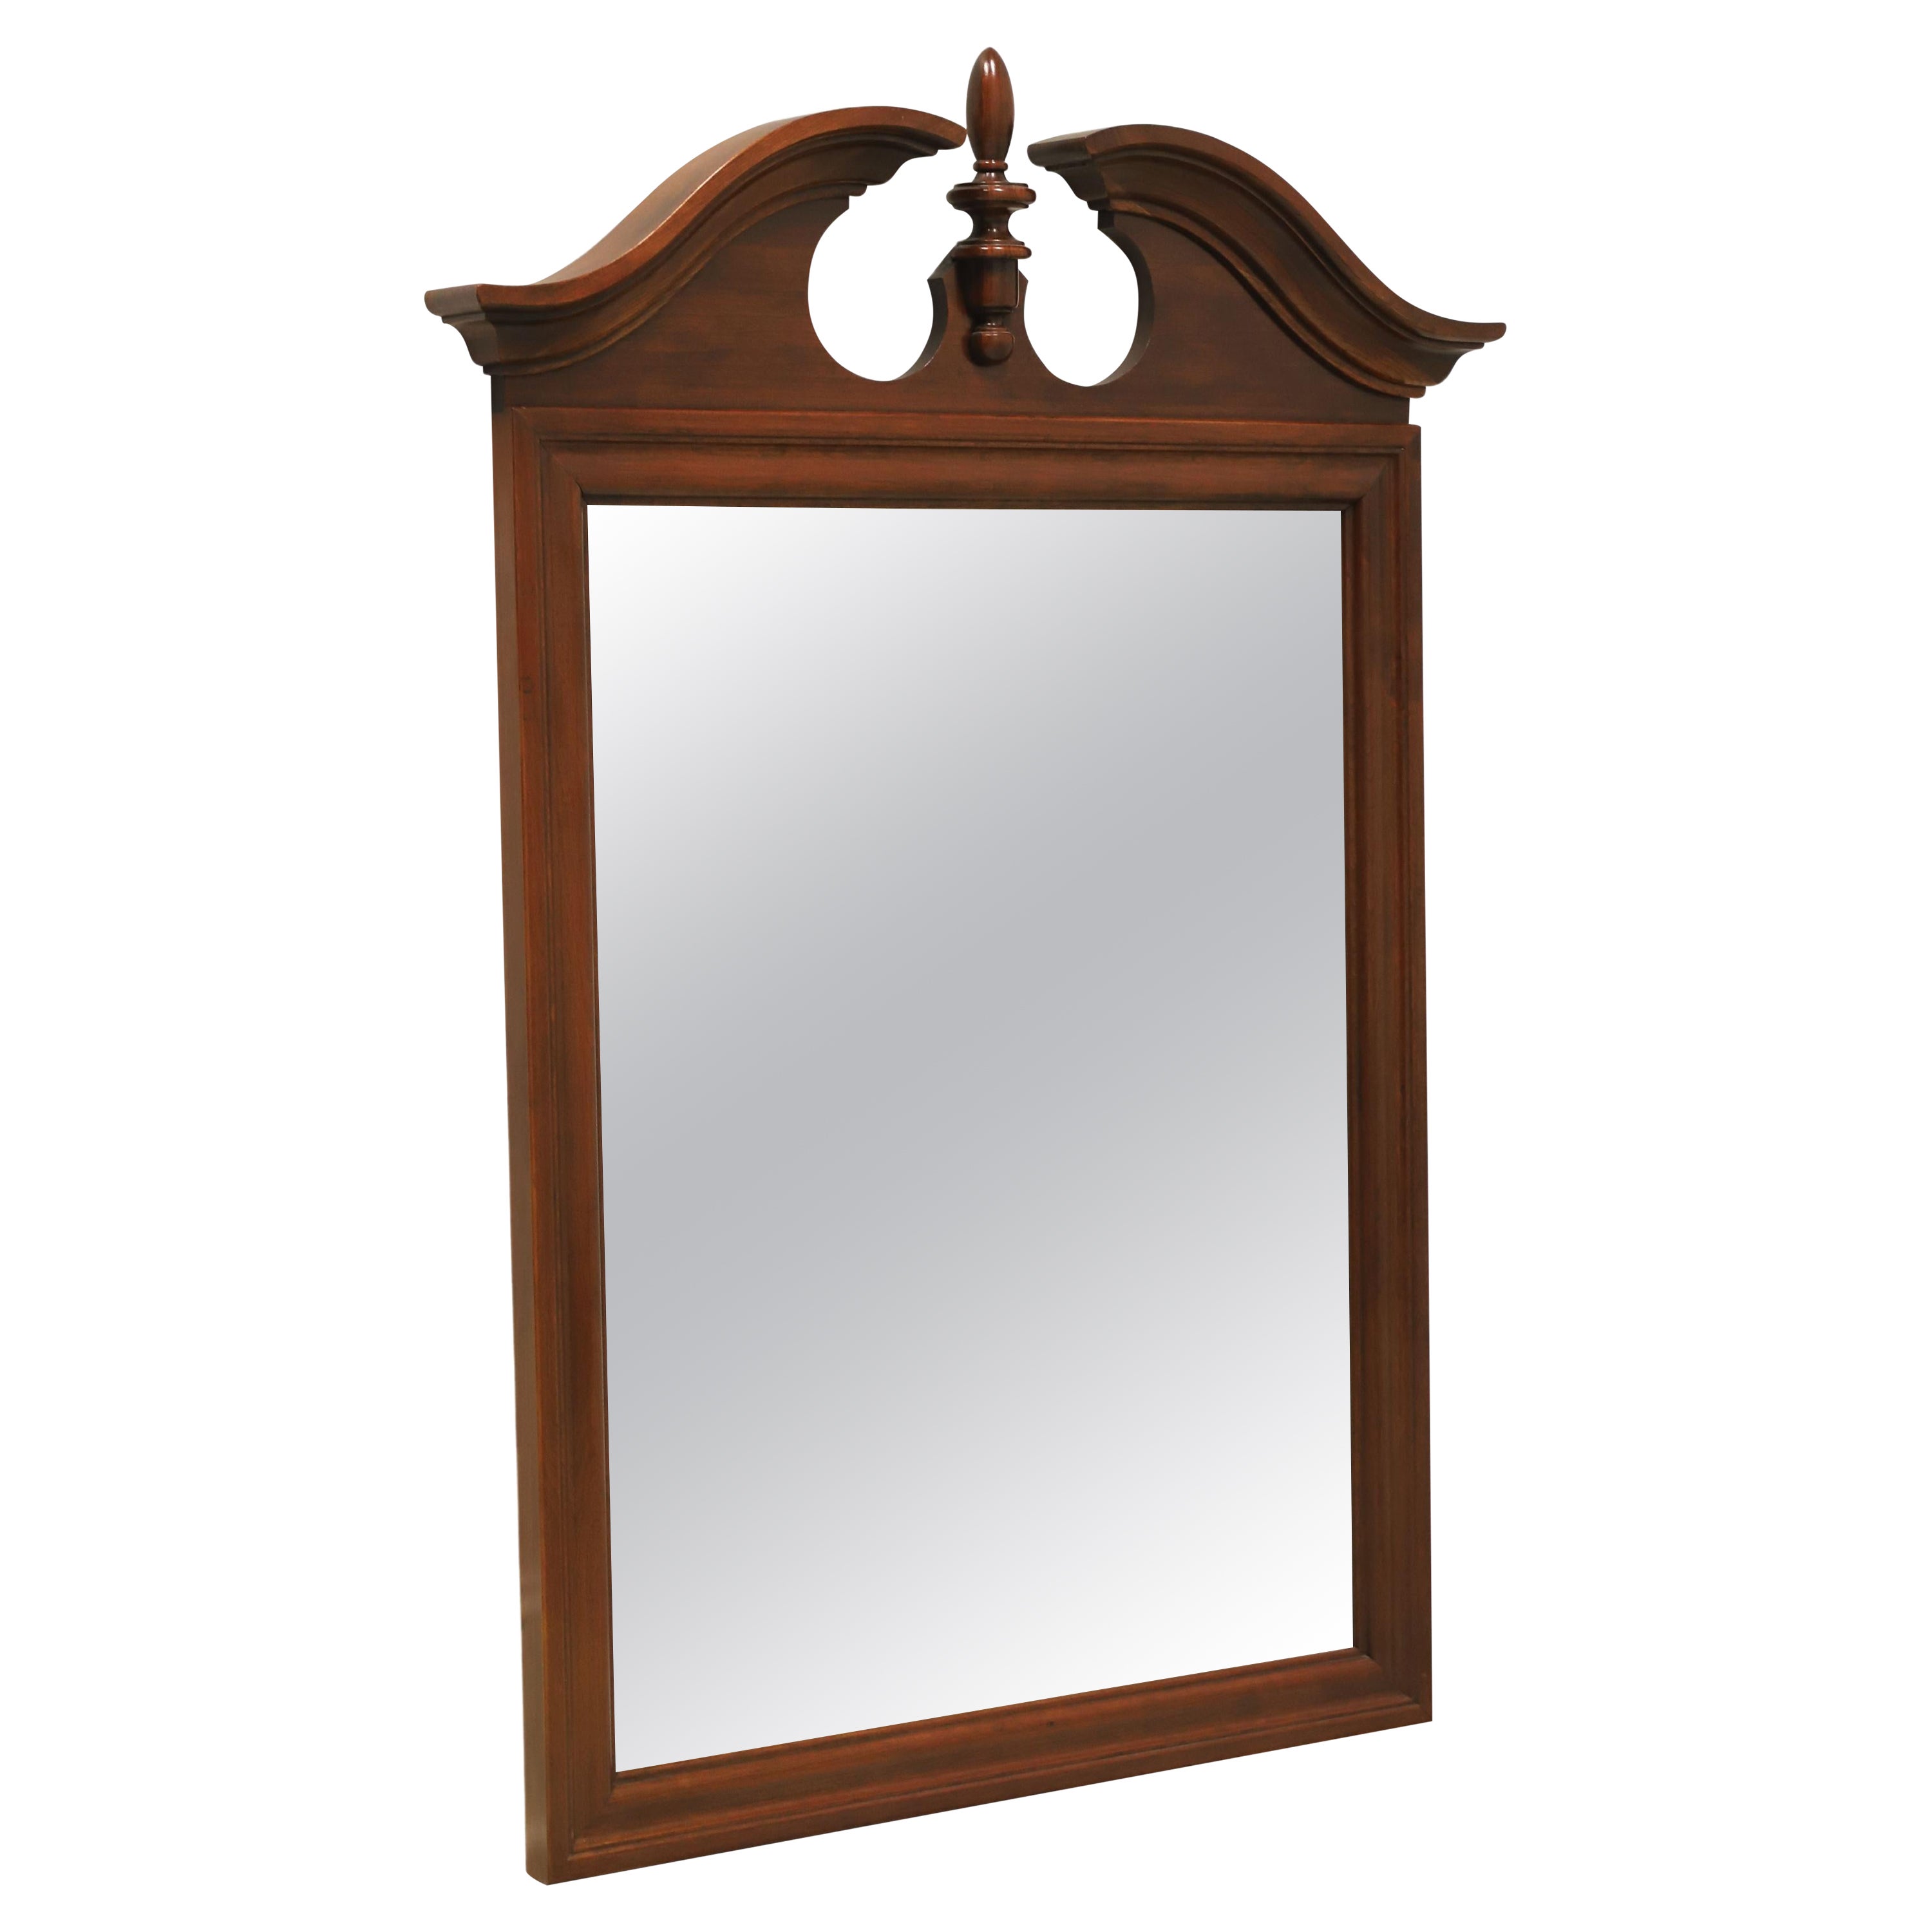 JAMESTOWN STERLING Cherry Chippendale Wall Mirror For Sale